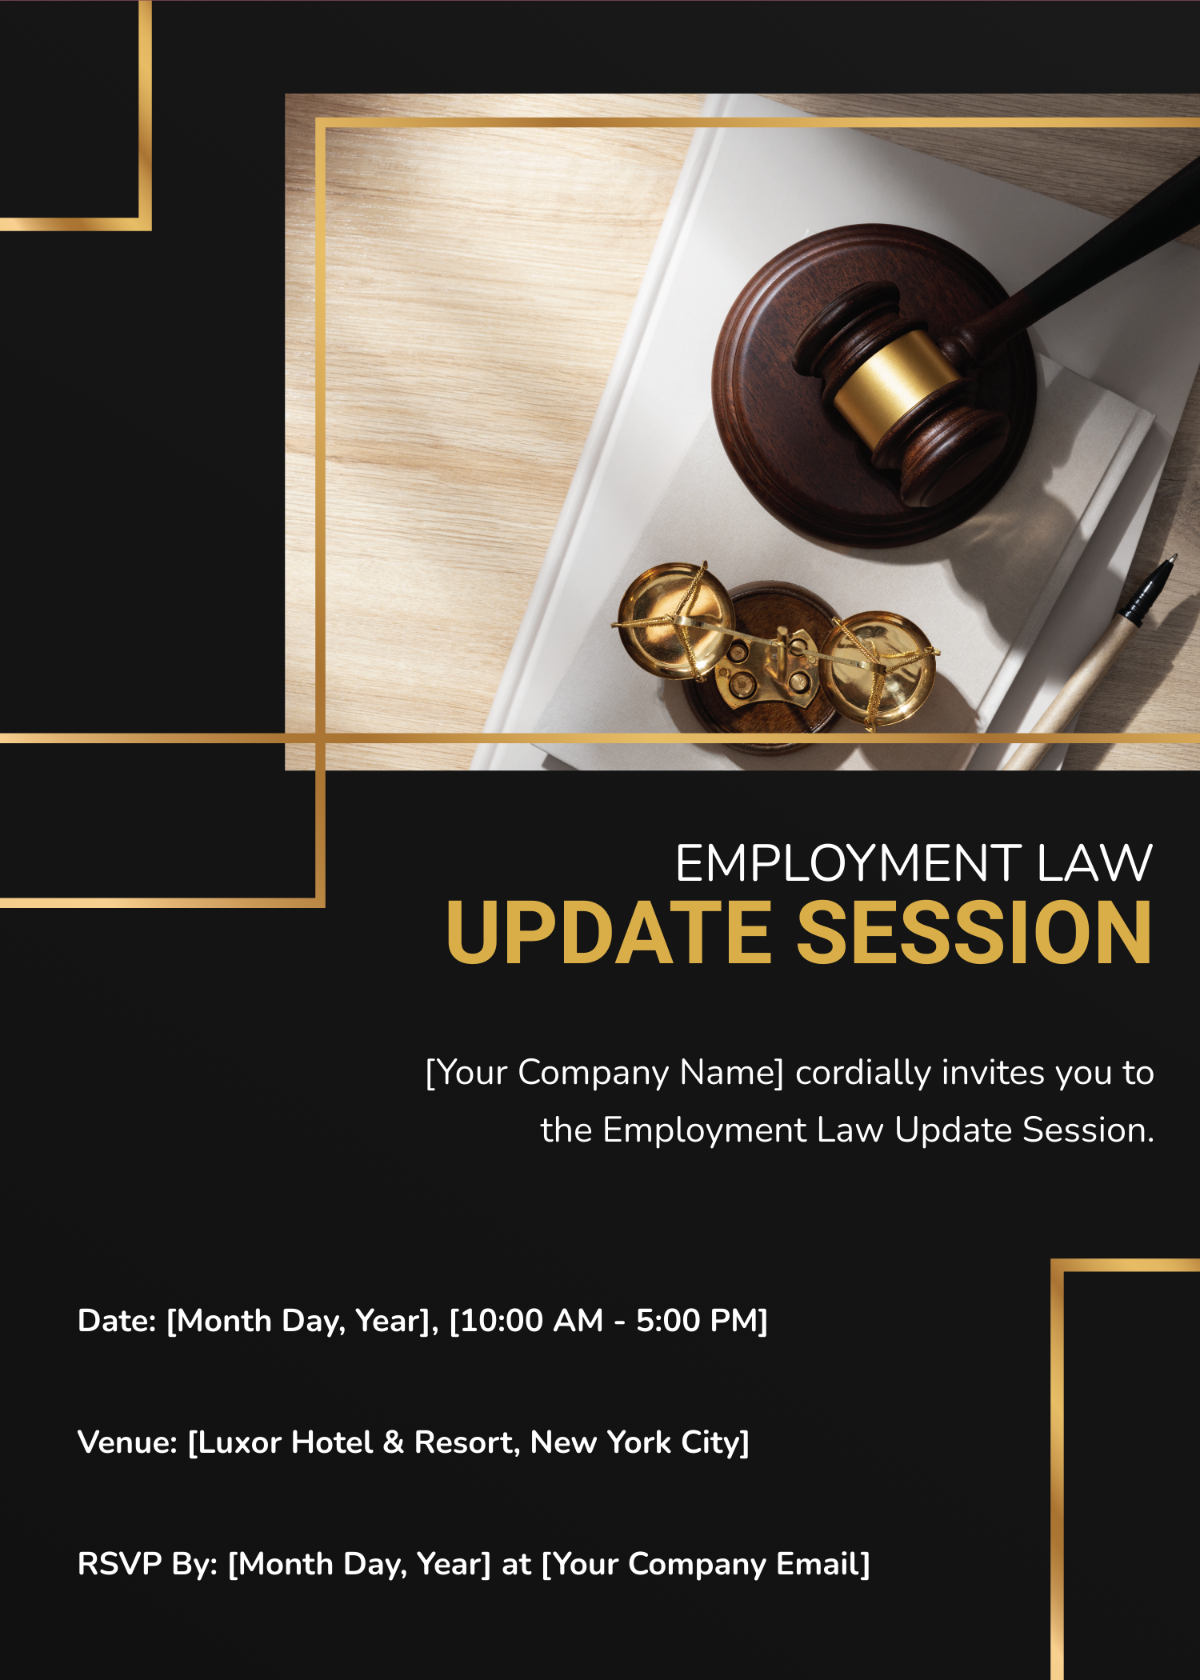 Employment Law Update Session Invitation Card Template